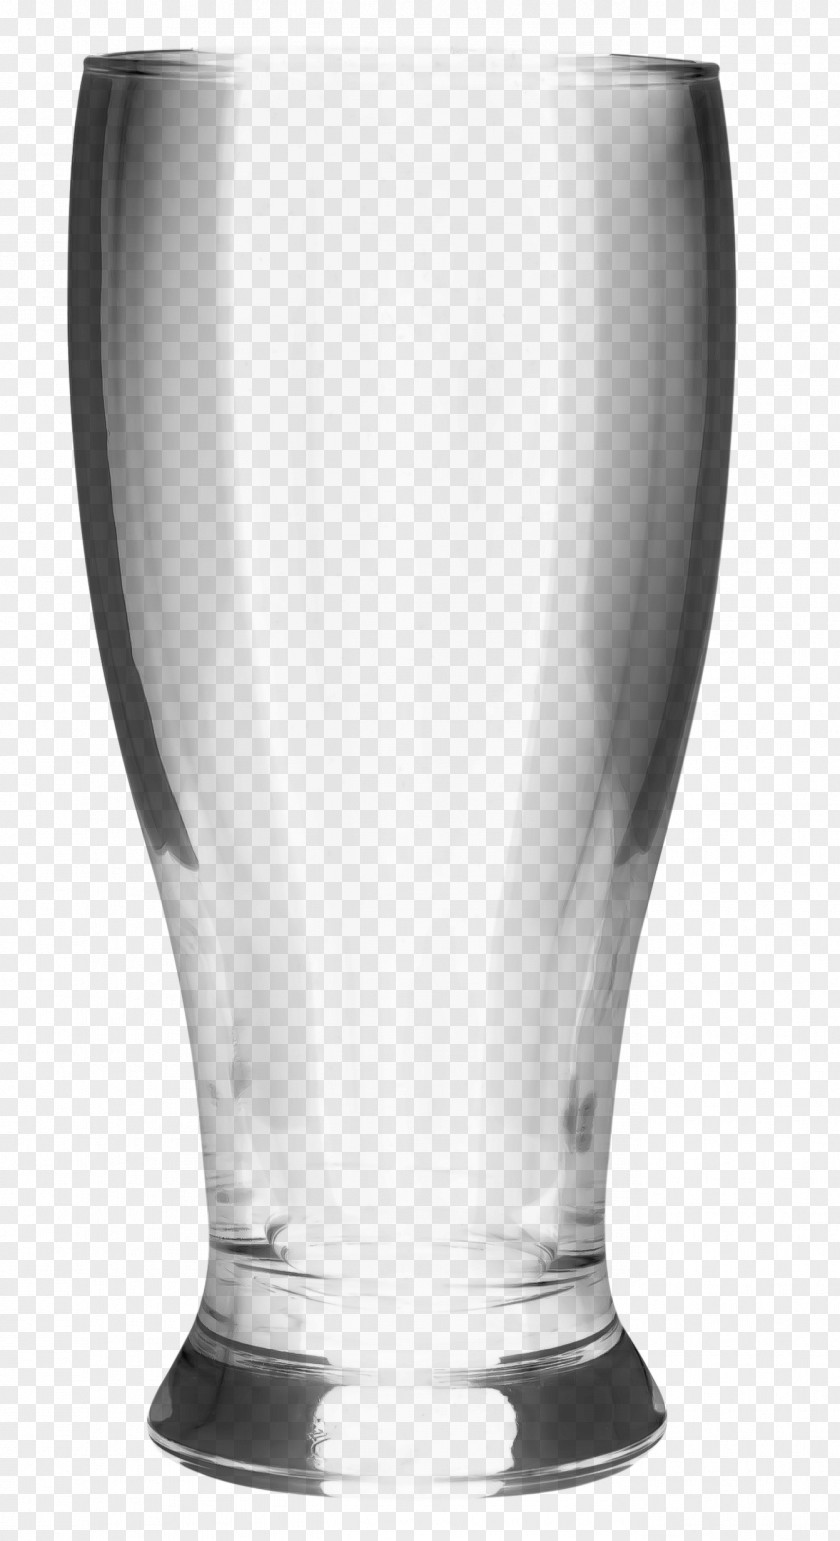 Champagne Highball Glass Pint Beer Glasses PNG